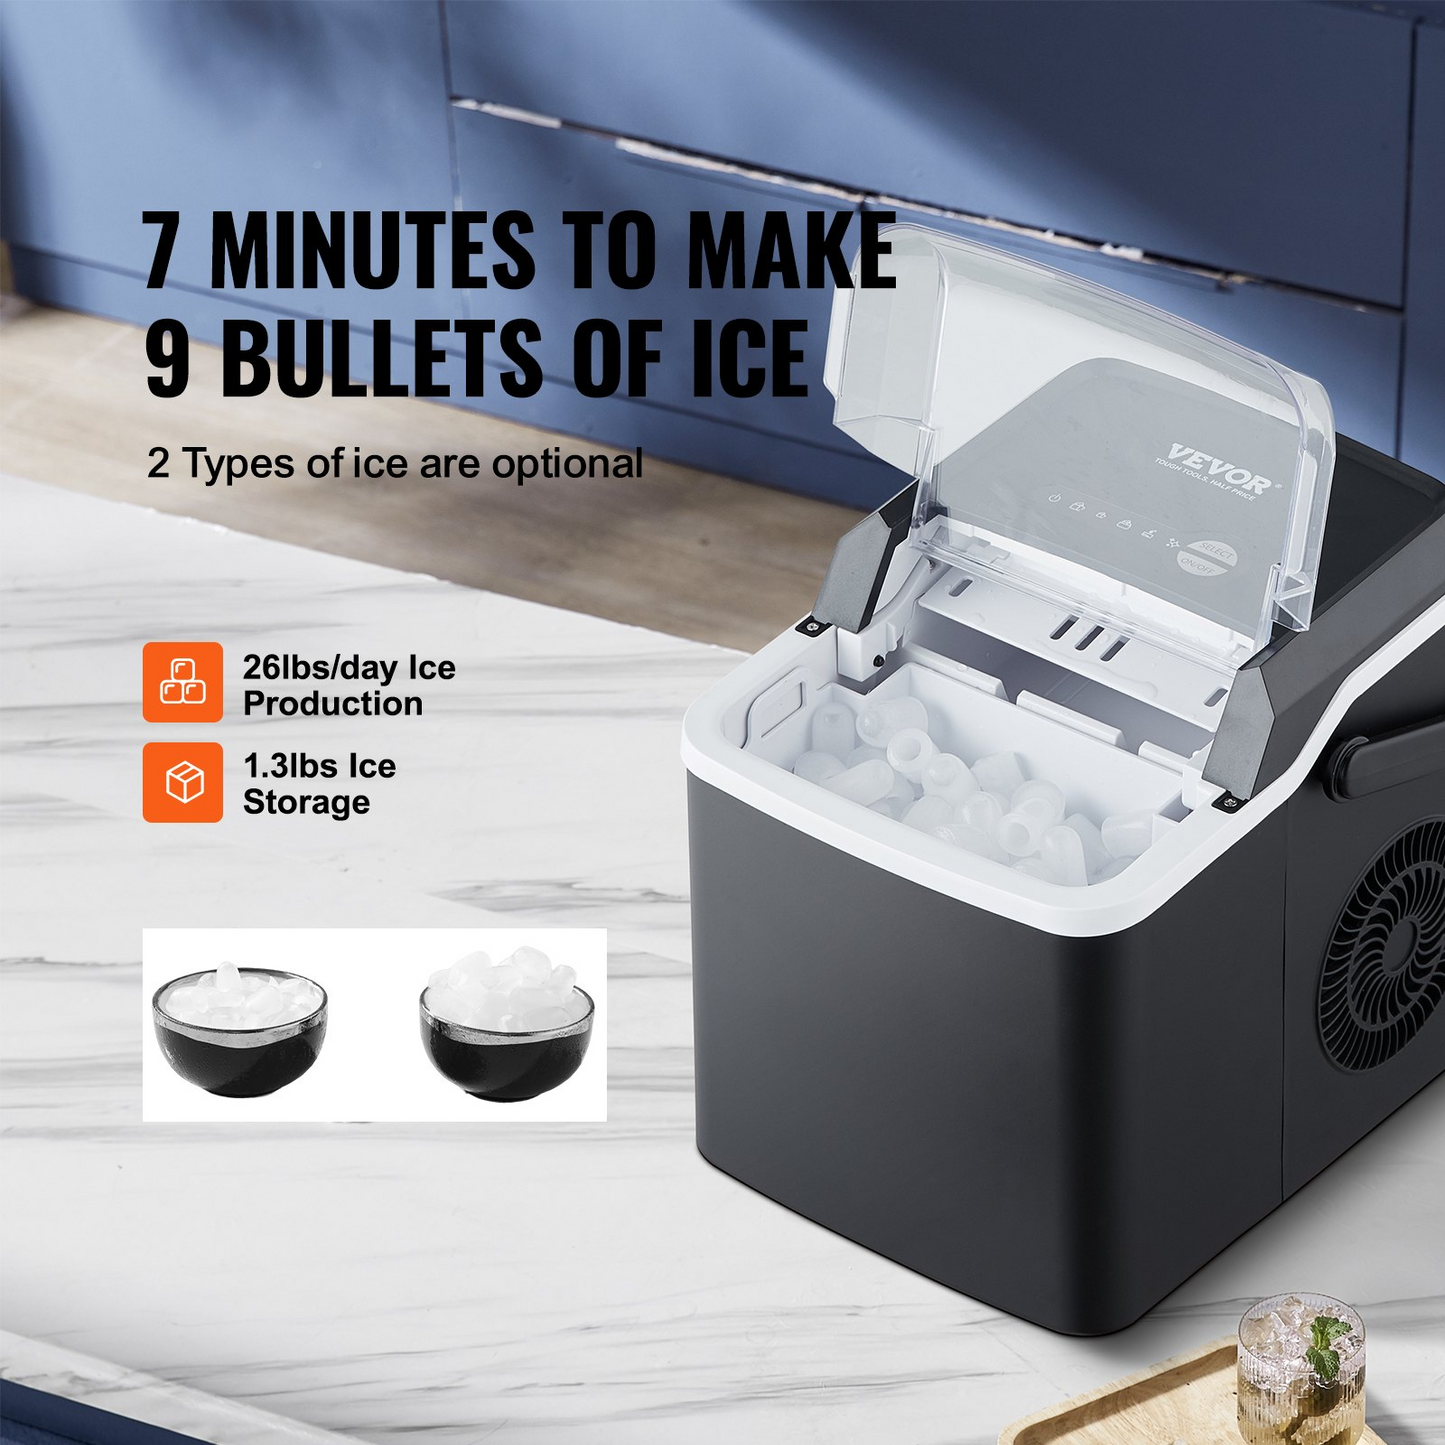 VEVOR Countertop Ice Maker, 9 Cubes Ready in 7 Mins, 26lbs in 24Hrs, Self-Cleaning Portable Ice Maker with Ice Scoop and Basket, Ice Machine with 2 Sizes Bullet Ice for Home Kitchen Office Bar Party, Goodies N Stuff